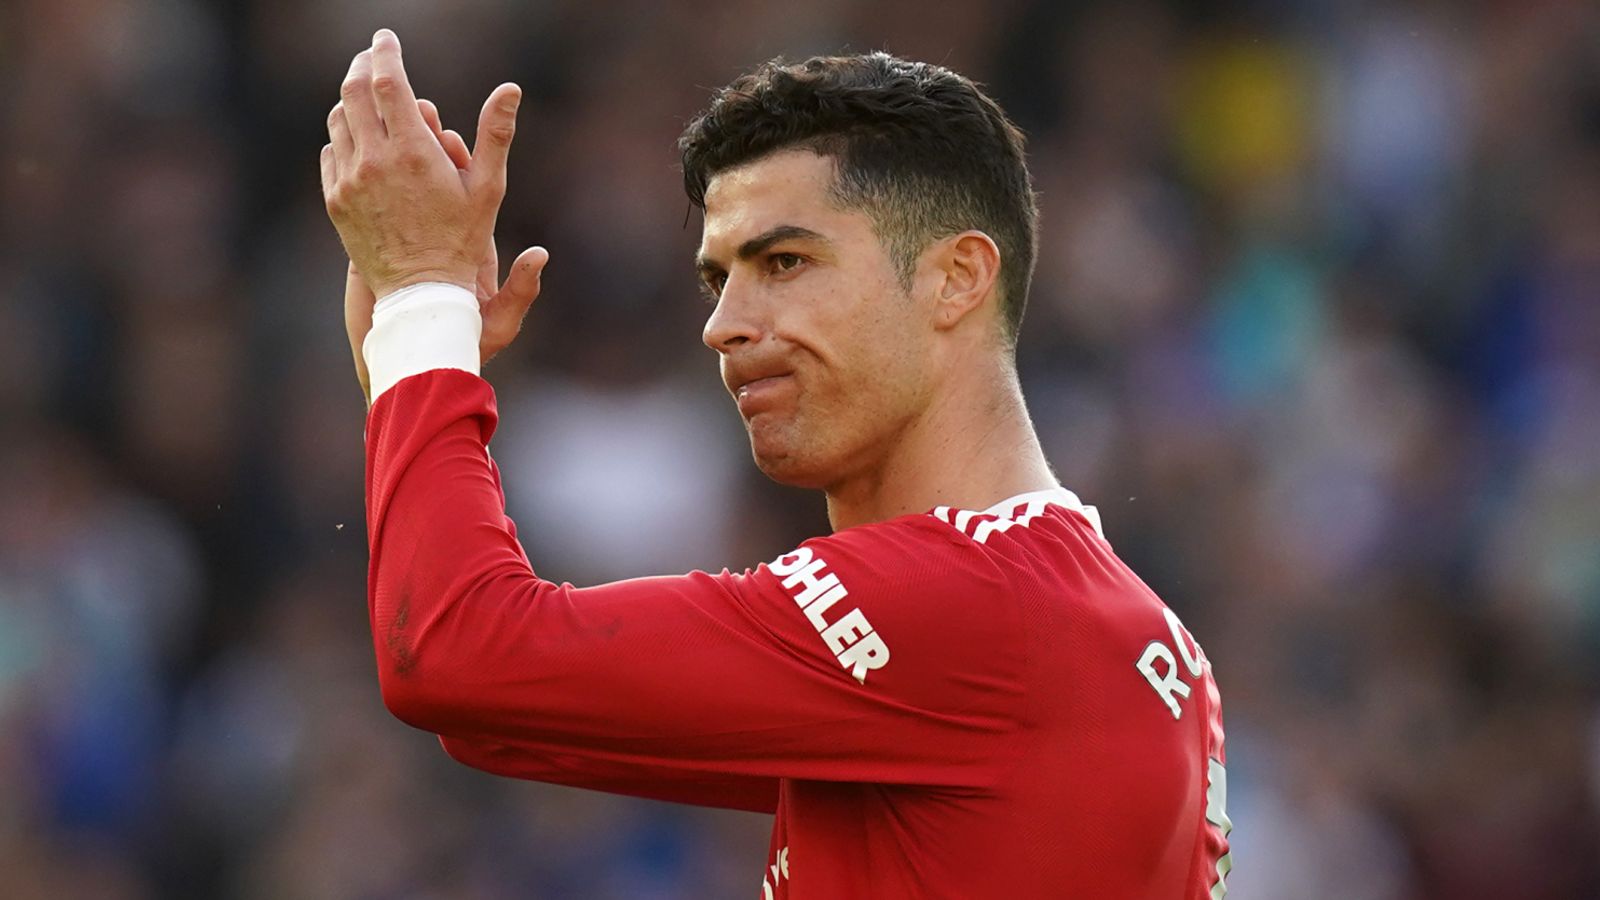 Cristiano Ronaldo to miss Manchester United’s final-day clash at Crystal Palace with hip injury